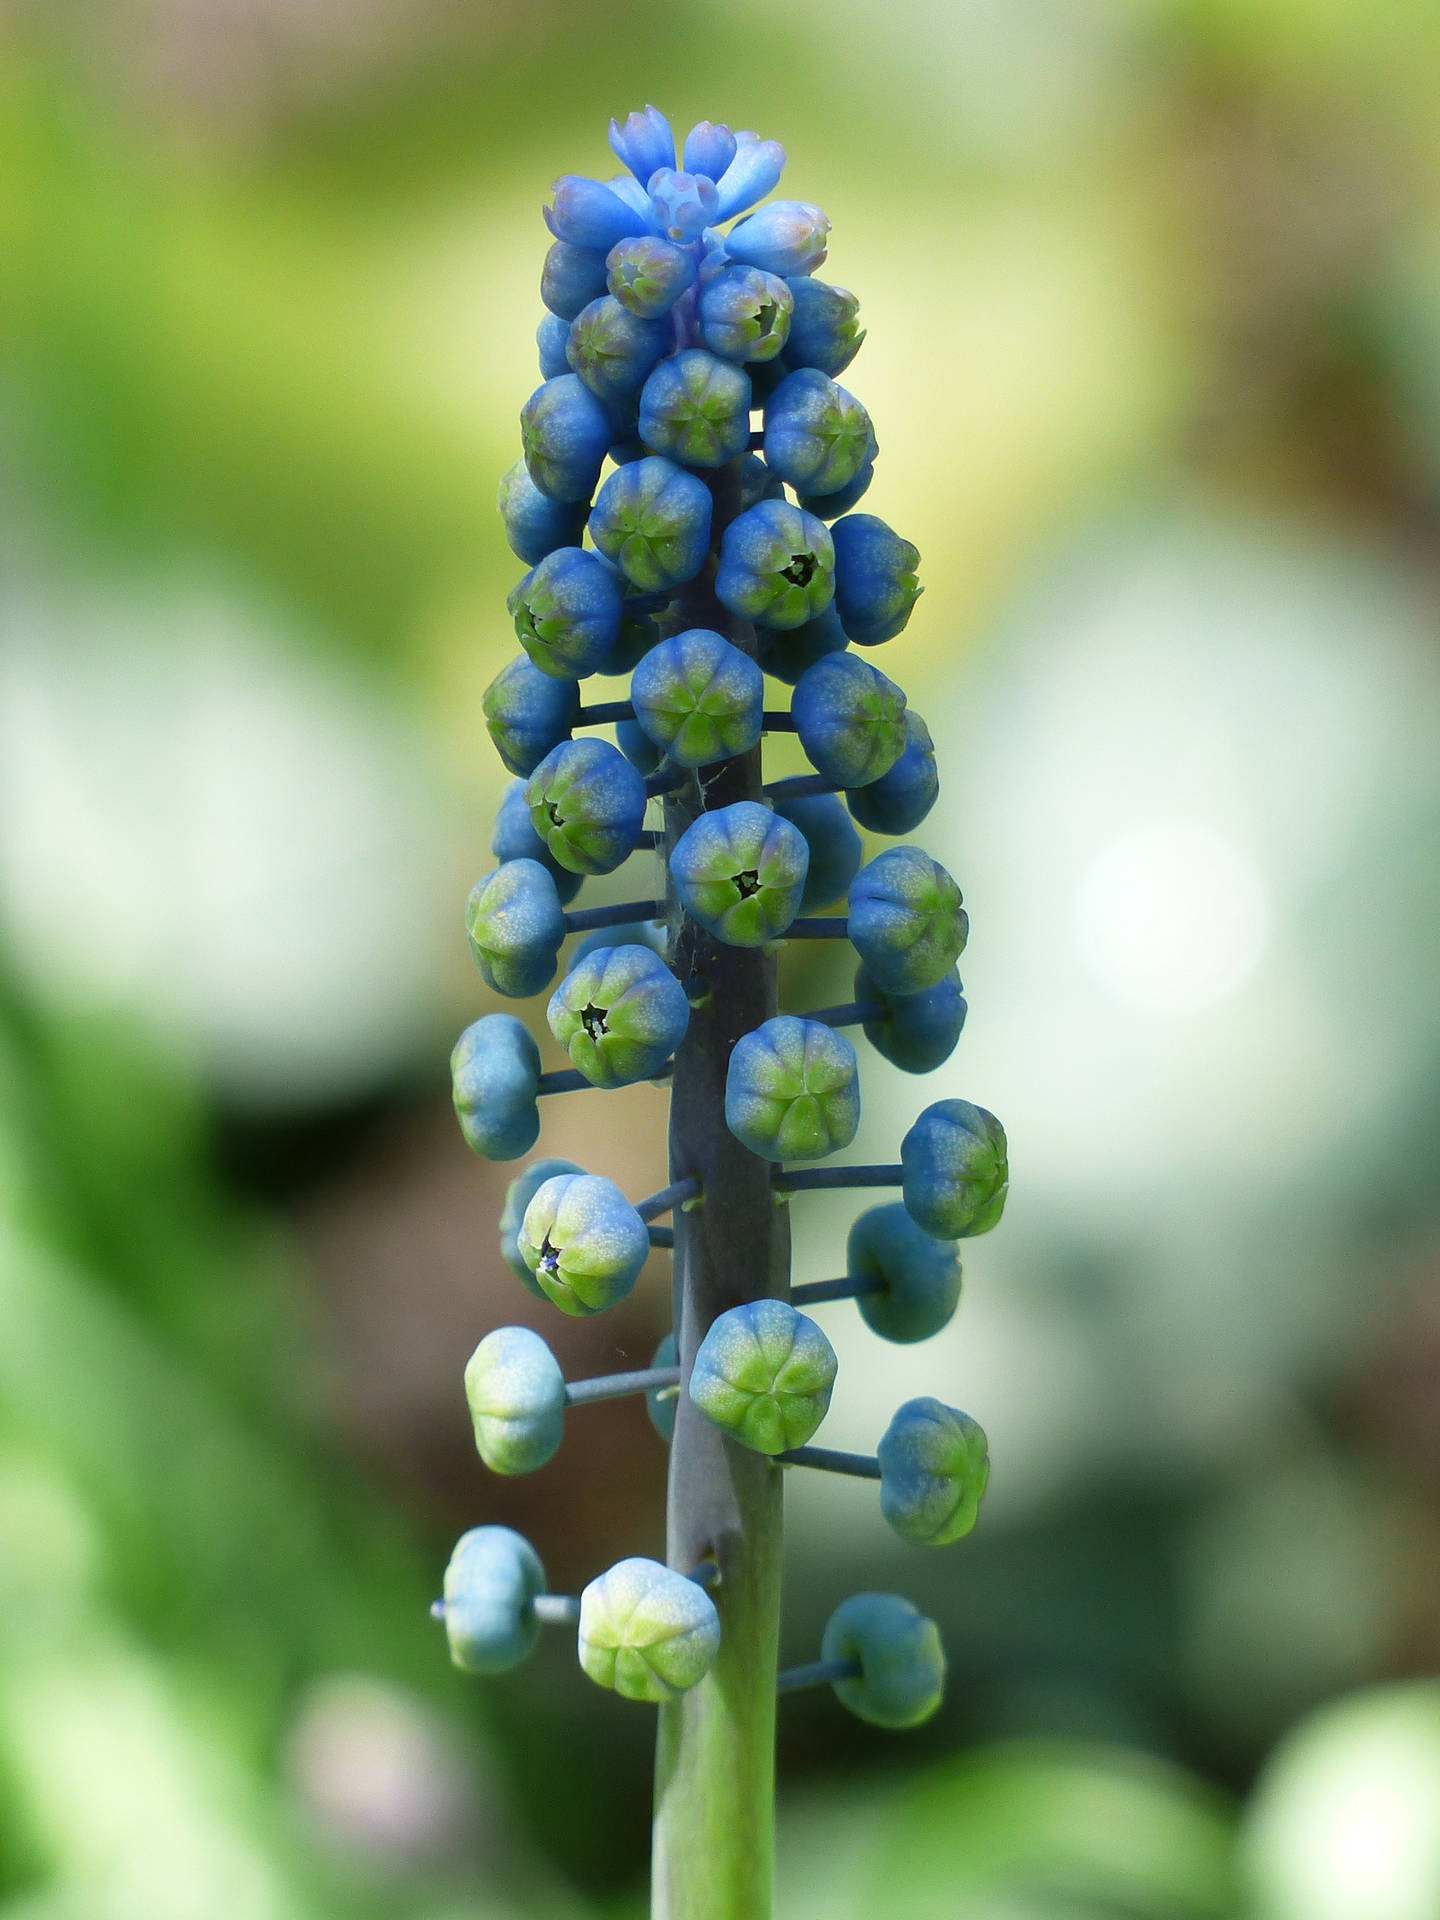 Unsprouted Hyacinth Buds